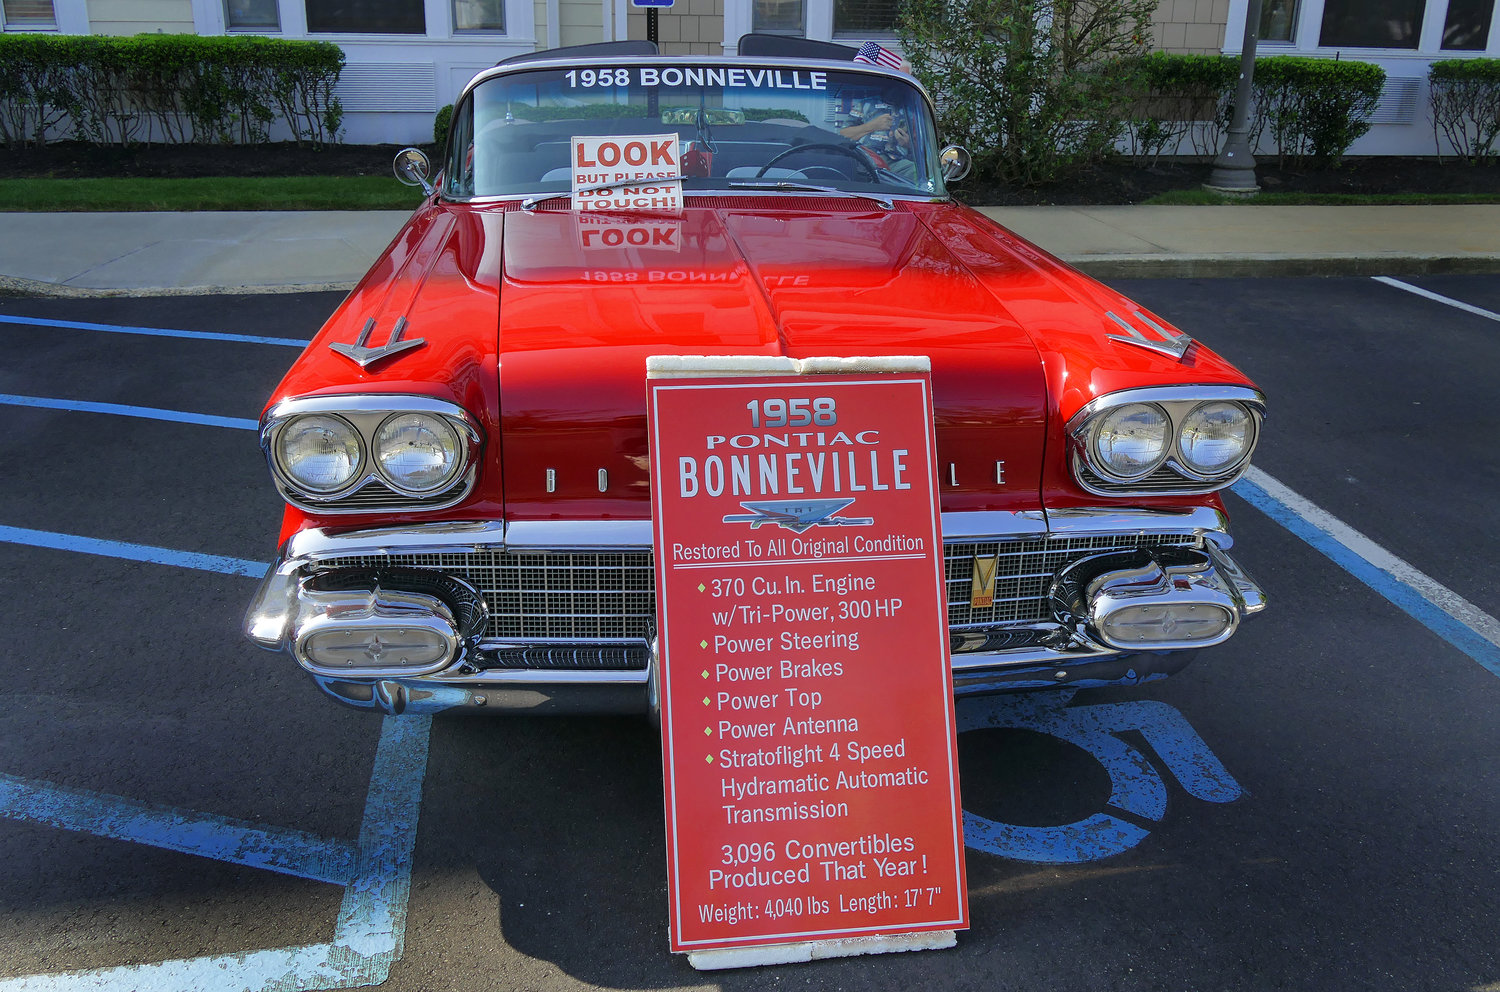 The Bristal Assisted Living facility at North Woodmere kicked off its inaugural annual car show last week with a line-up of antique and classic cars for the residents to enjoy.